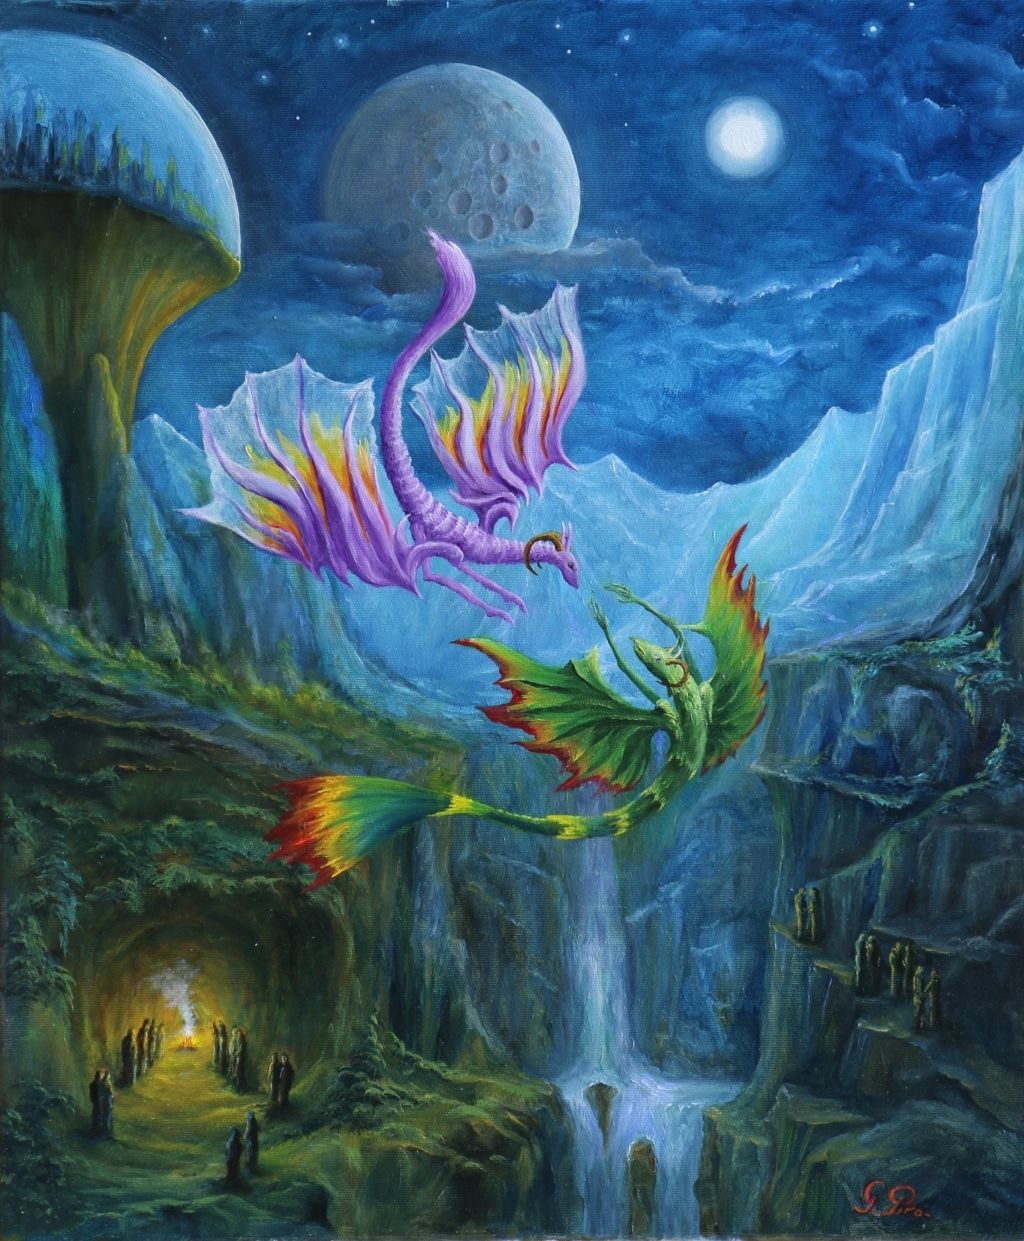 gregory pyra piro, surrealistic, oil painting, distant planet, alien solar system, landscape, moonlight,noturnal setting, colossal dragons, dinosaurs, vibrant colors, cave, green vegetation, waterfalls, ethereal apparitions, ghostly owl, dome city, majestic mountains, two moons, craters, shining moon, satellites, blue and white mountains